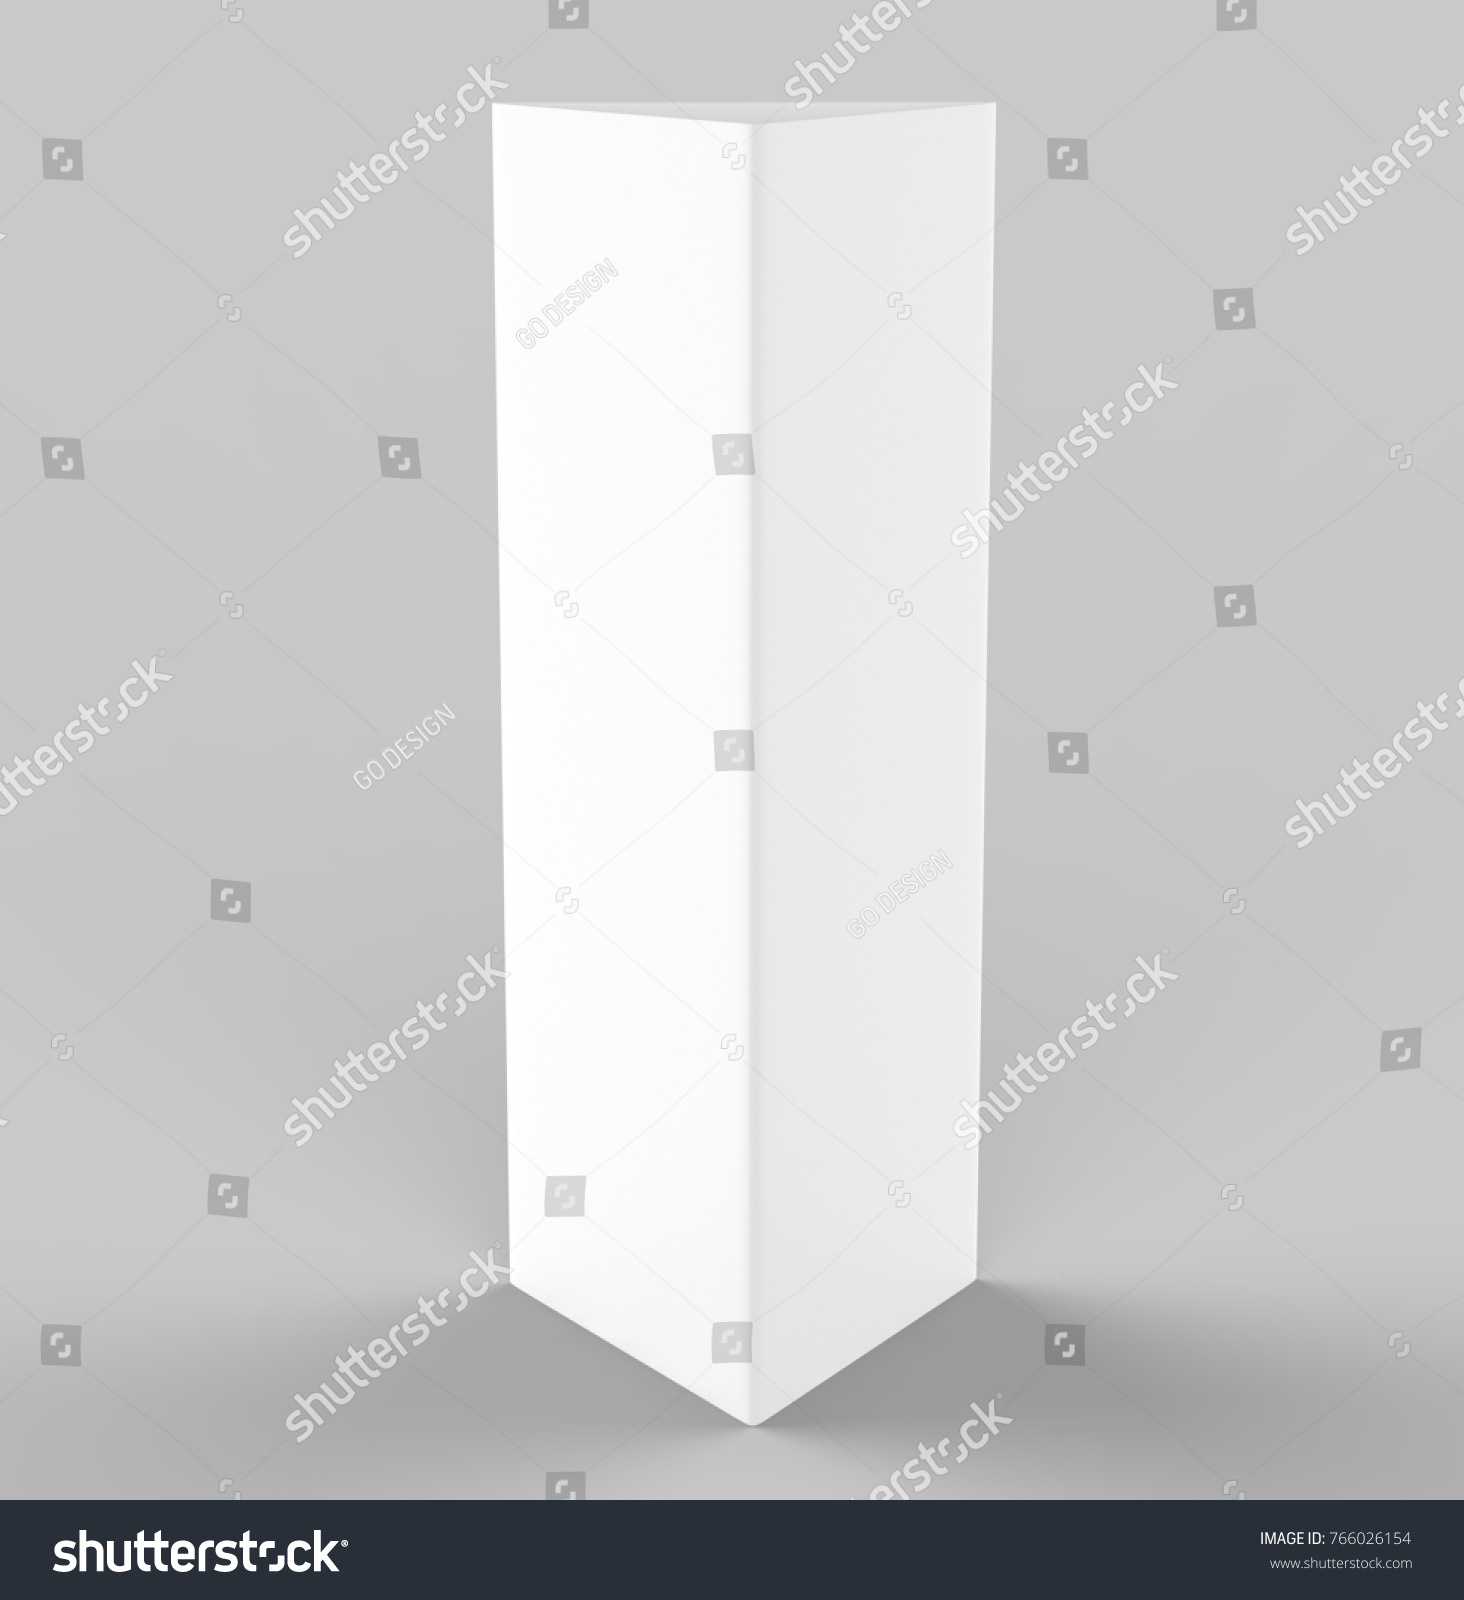 Стоковая Иллюстрация «White Blank Empty Paper Trifold Table With Tri Fold Tent Card Template